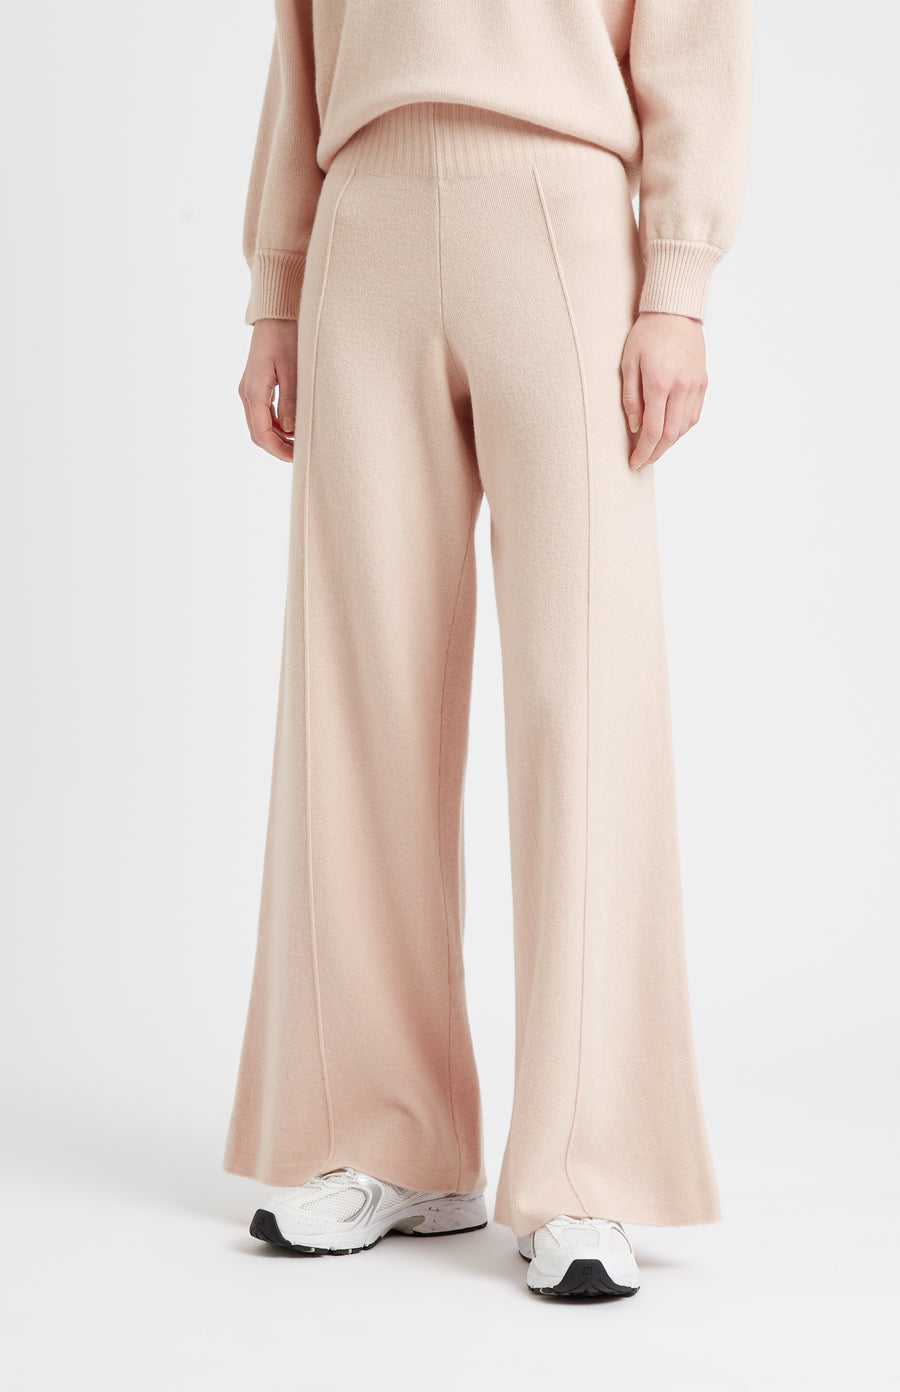 Pringle of Scotland Women's Cashmere Blend Trousers In Pink Champagne on model